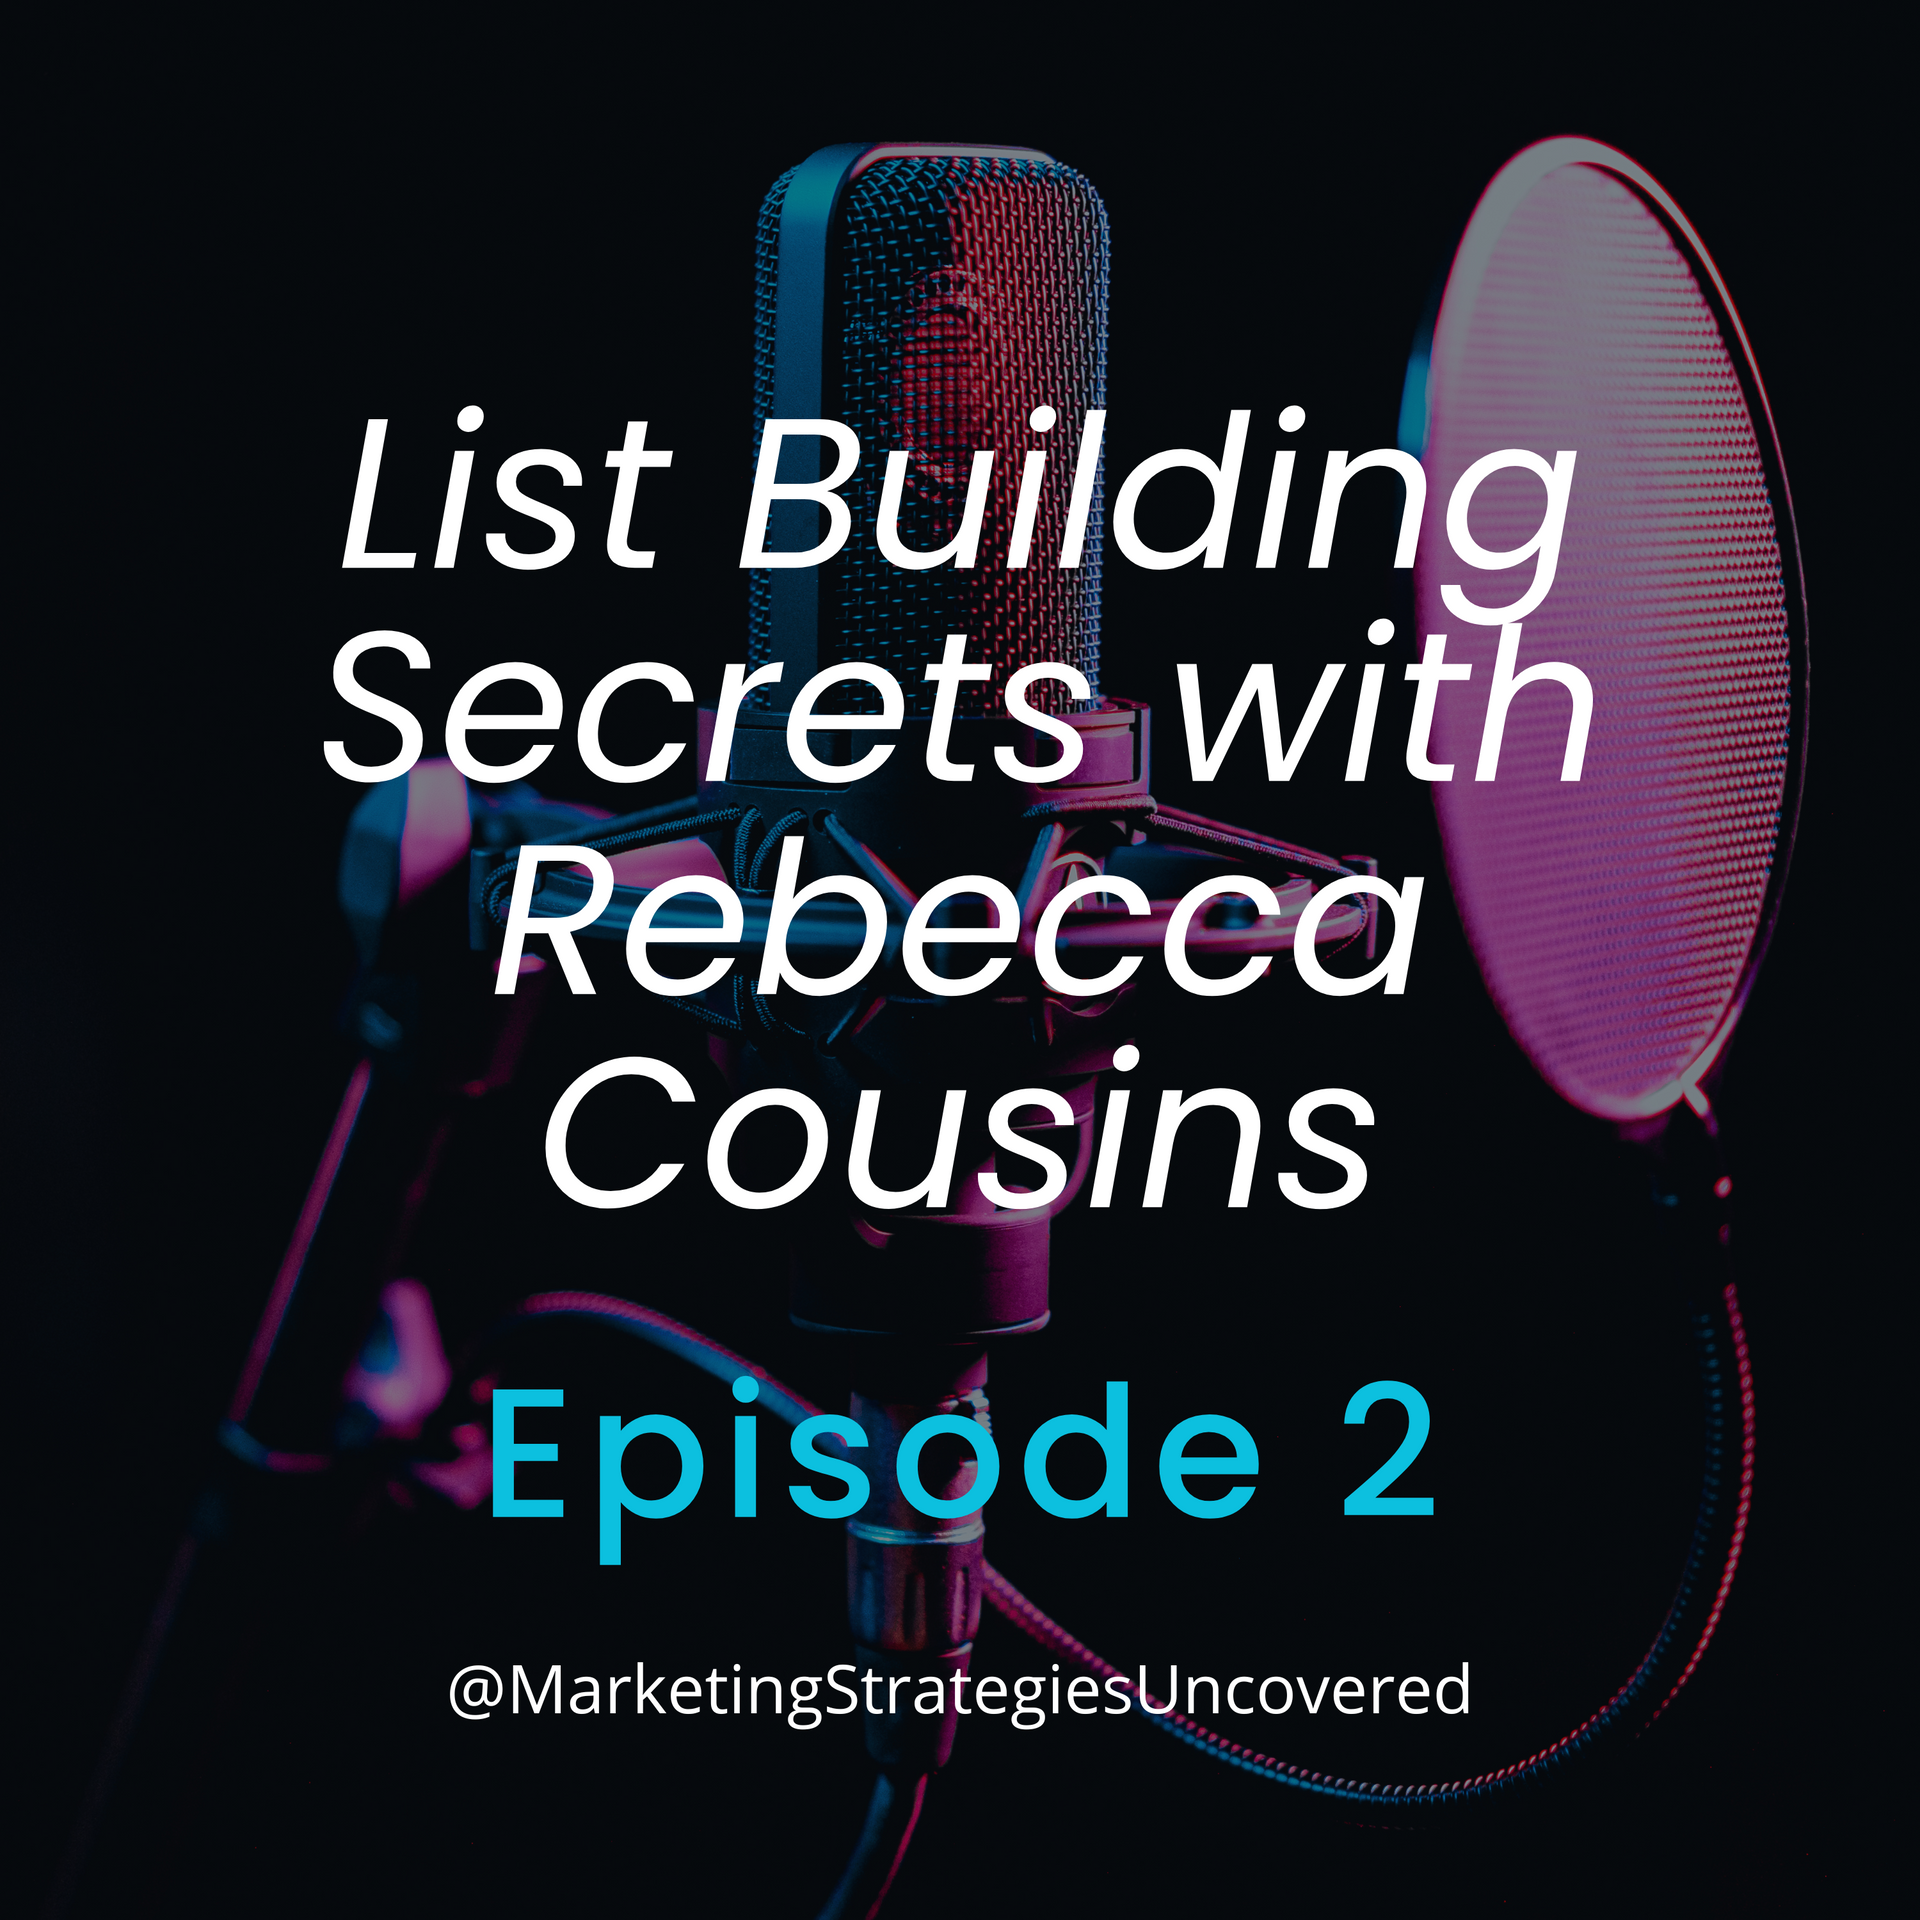 A poster that says list building secrets with rebecca cousins episode 2